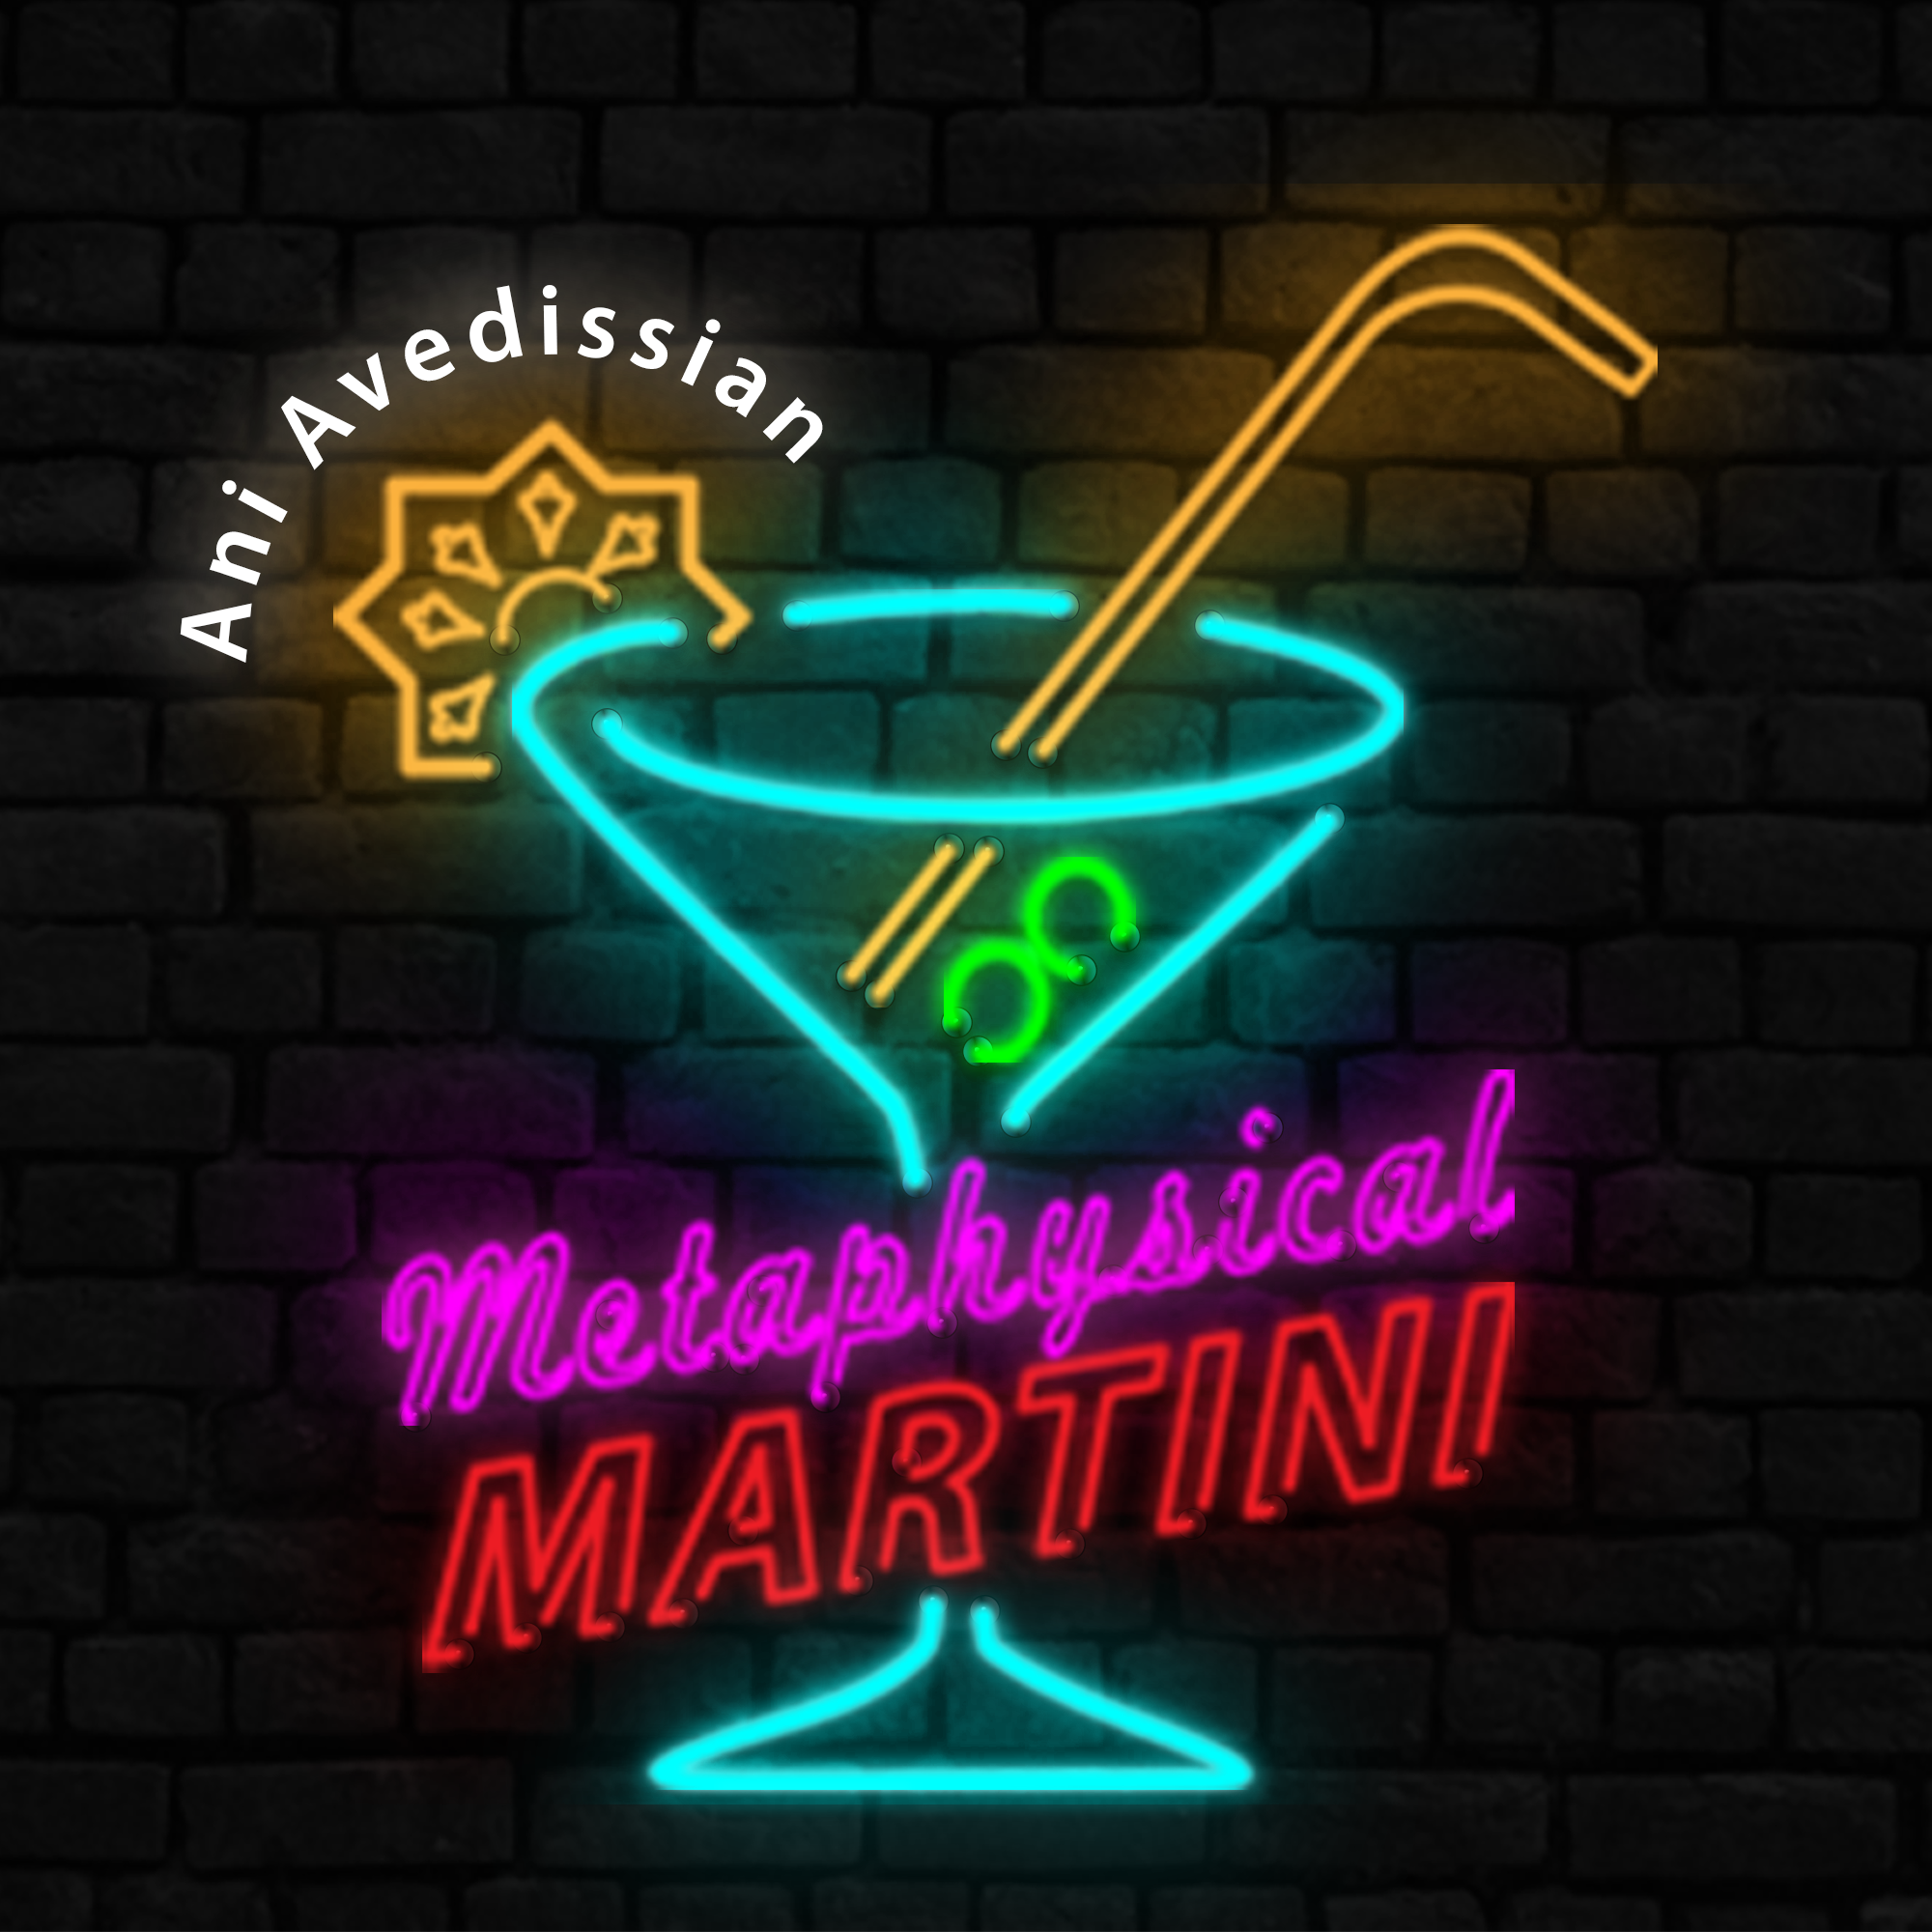 "Metaphysical Martini"   12/11/2019  Reptilians?  Cloning?  and all the other usual stuff!